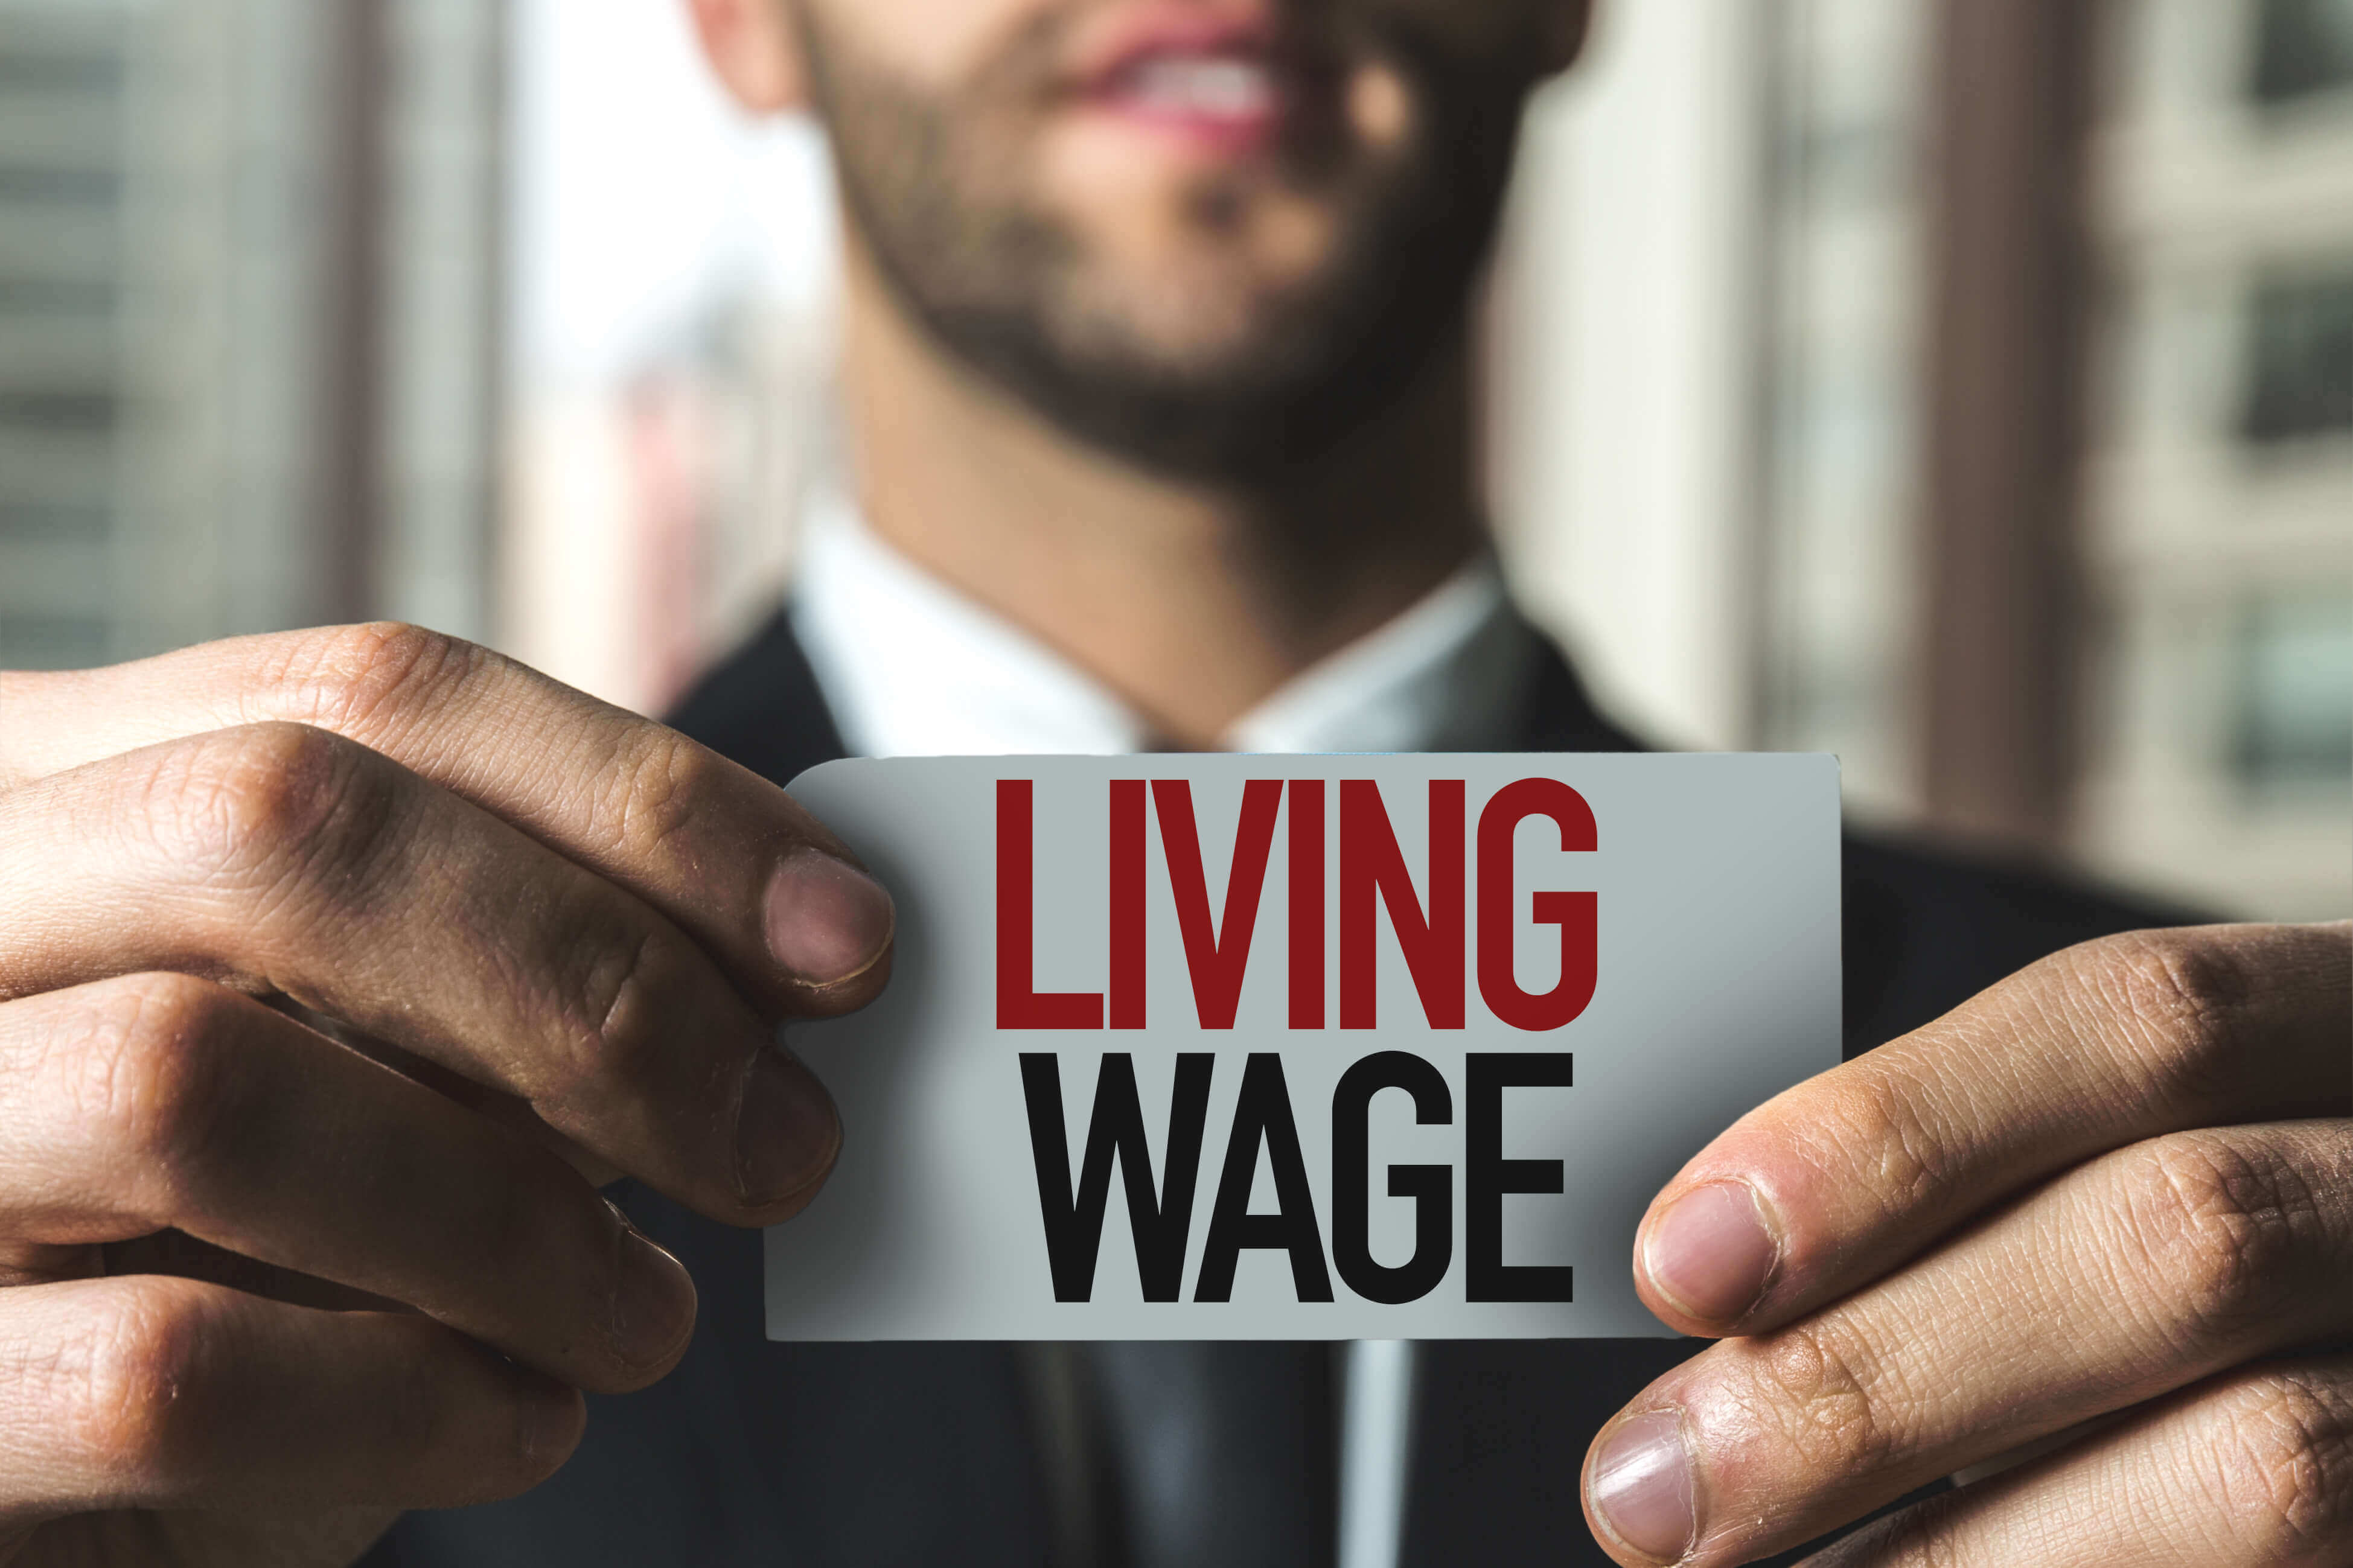 Person holding living wage image